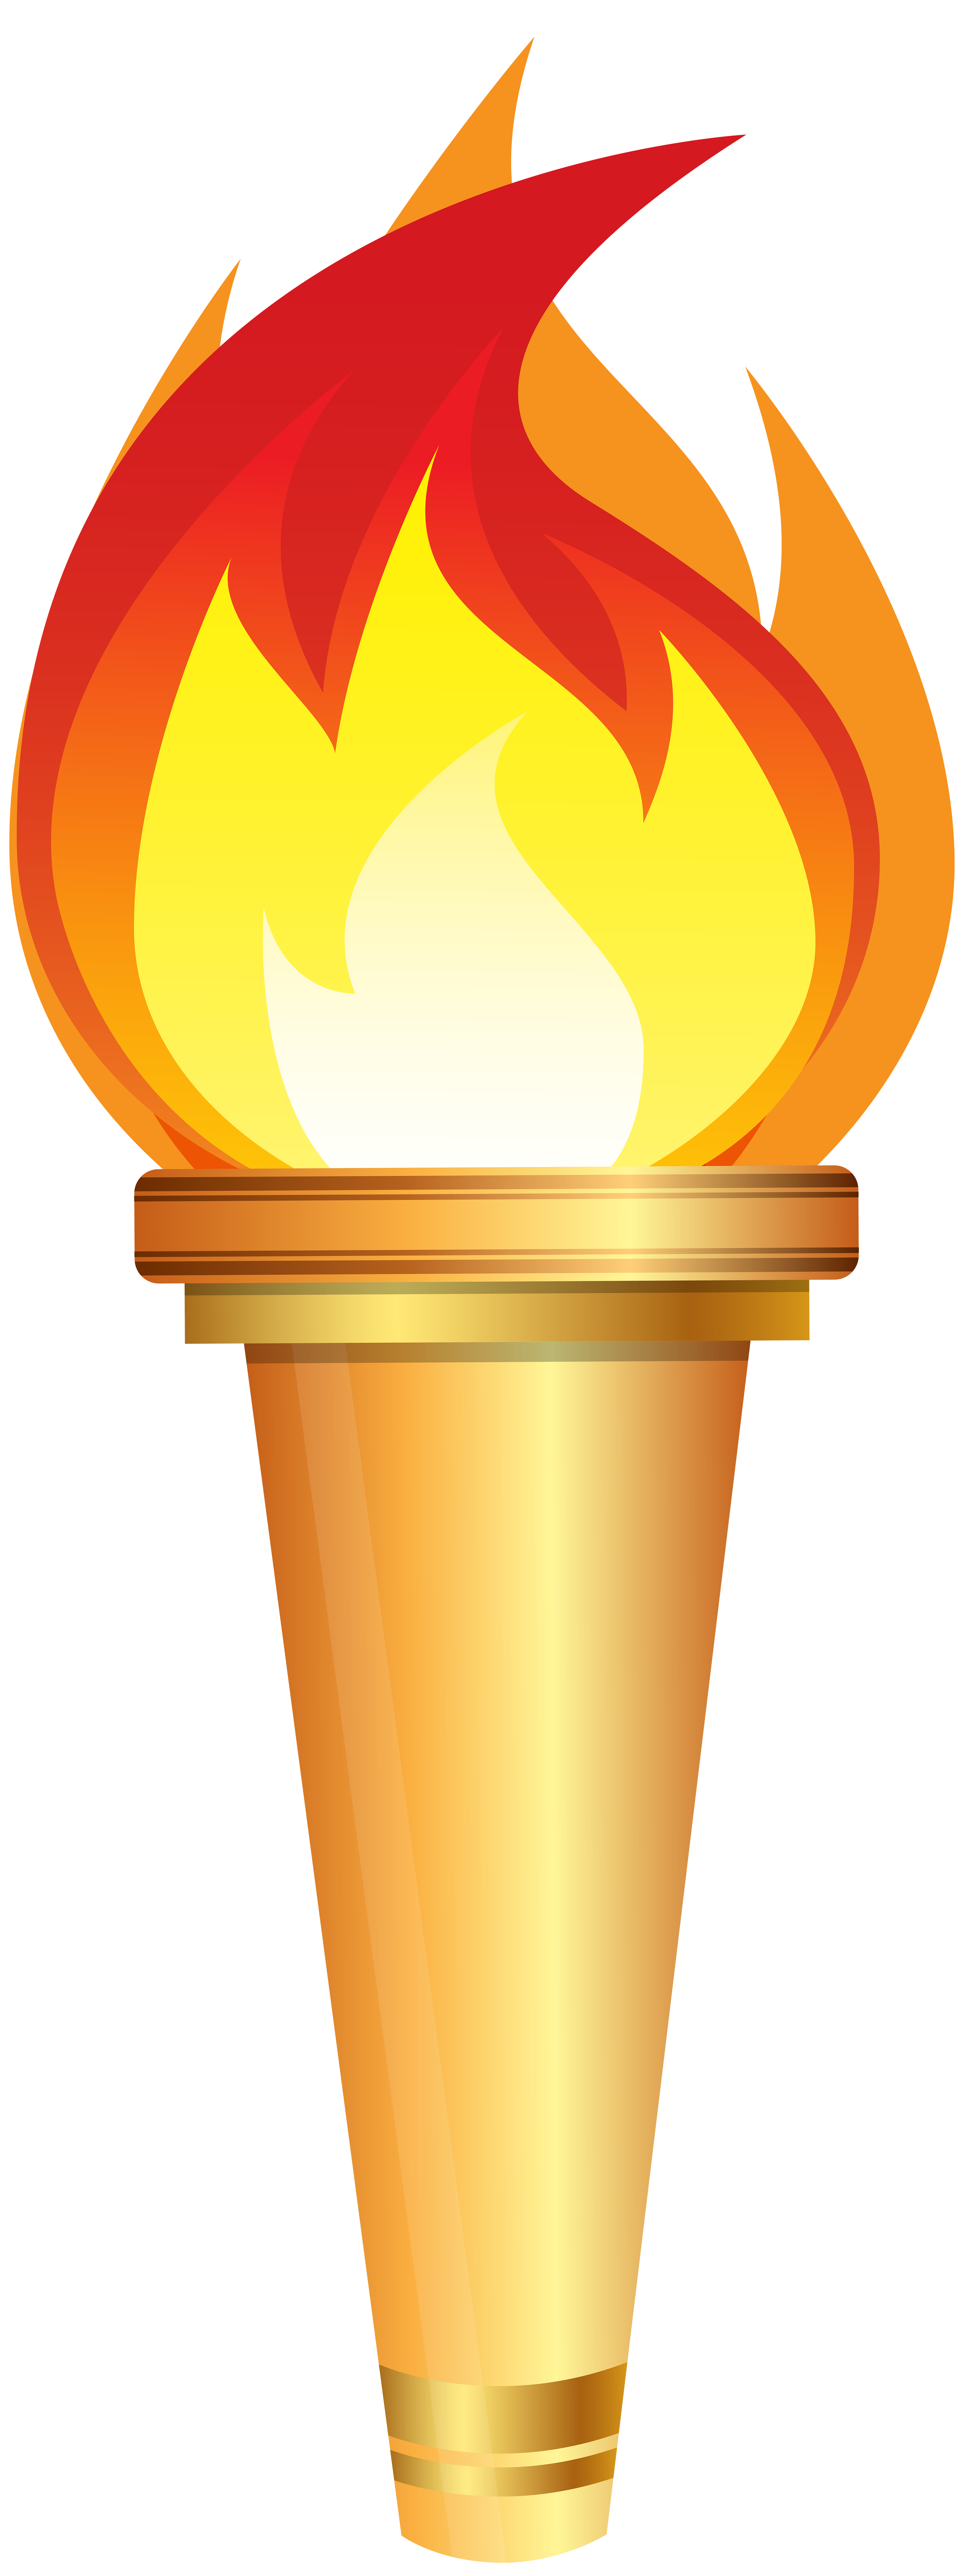 Olympic Torch Clipart.